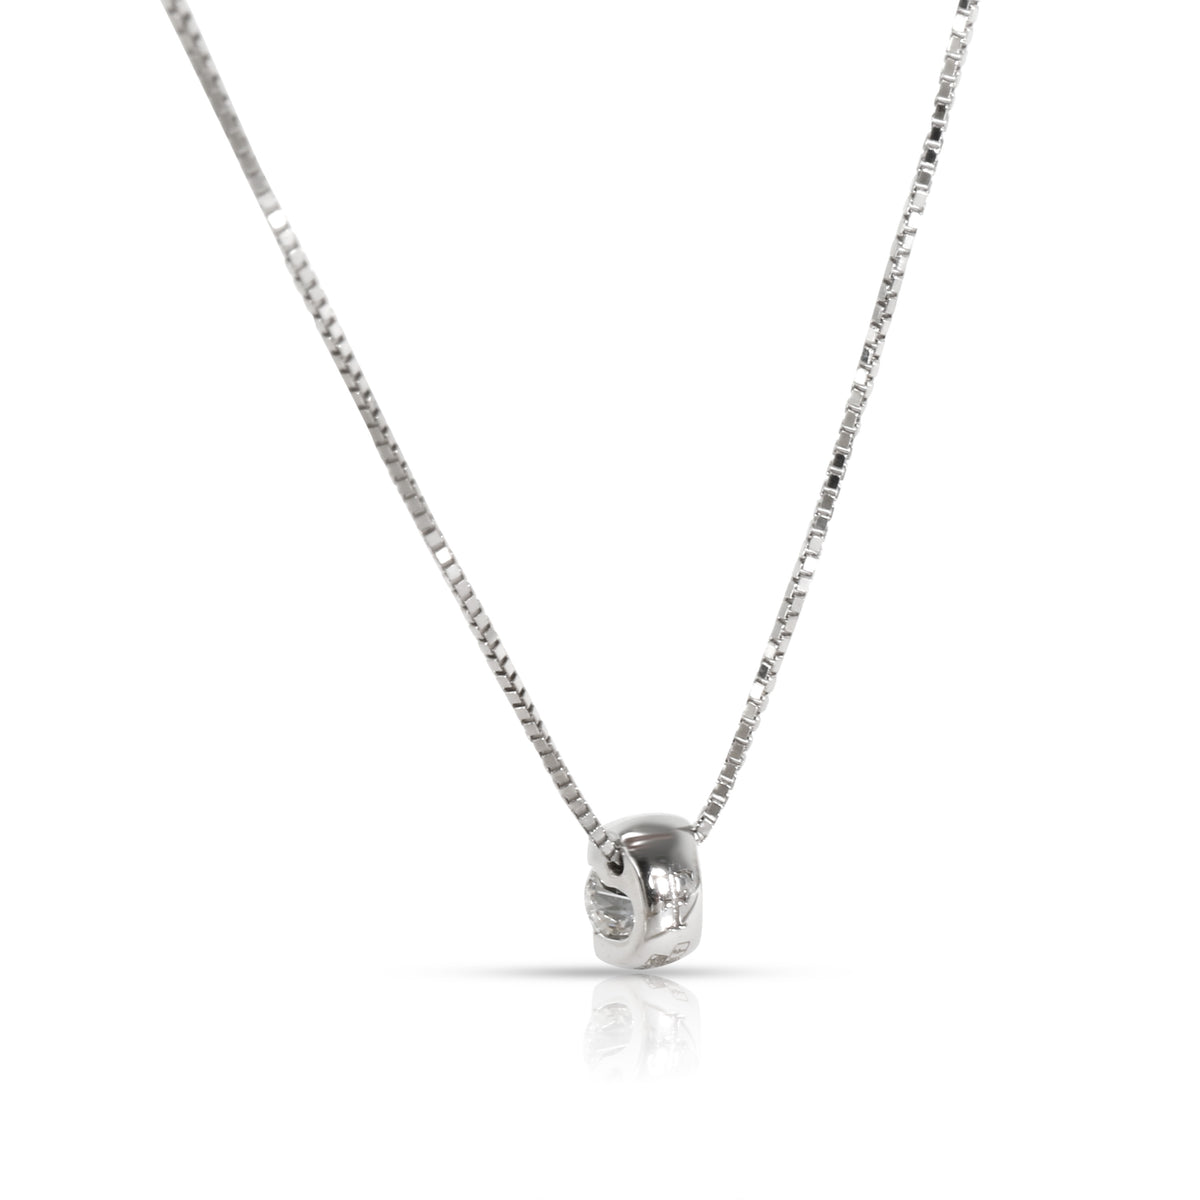 Theo Fennell Solitaire Pendant in 18K White Gold  0.25CTW